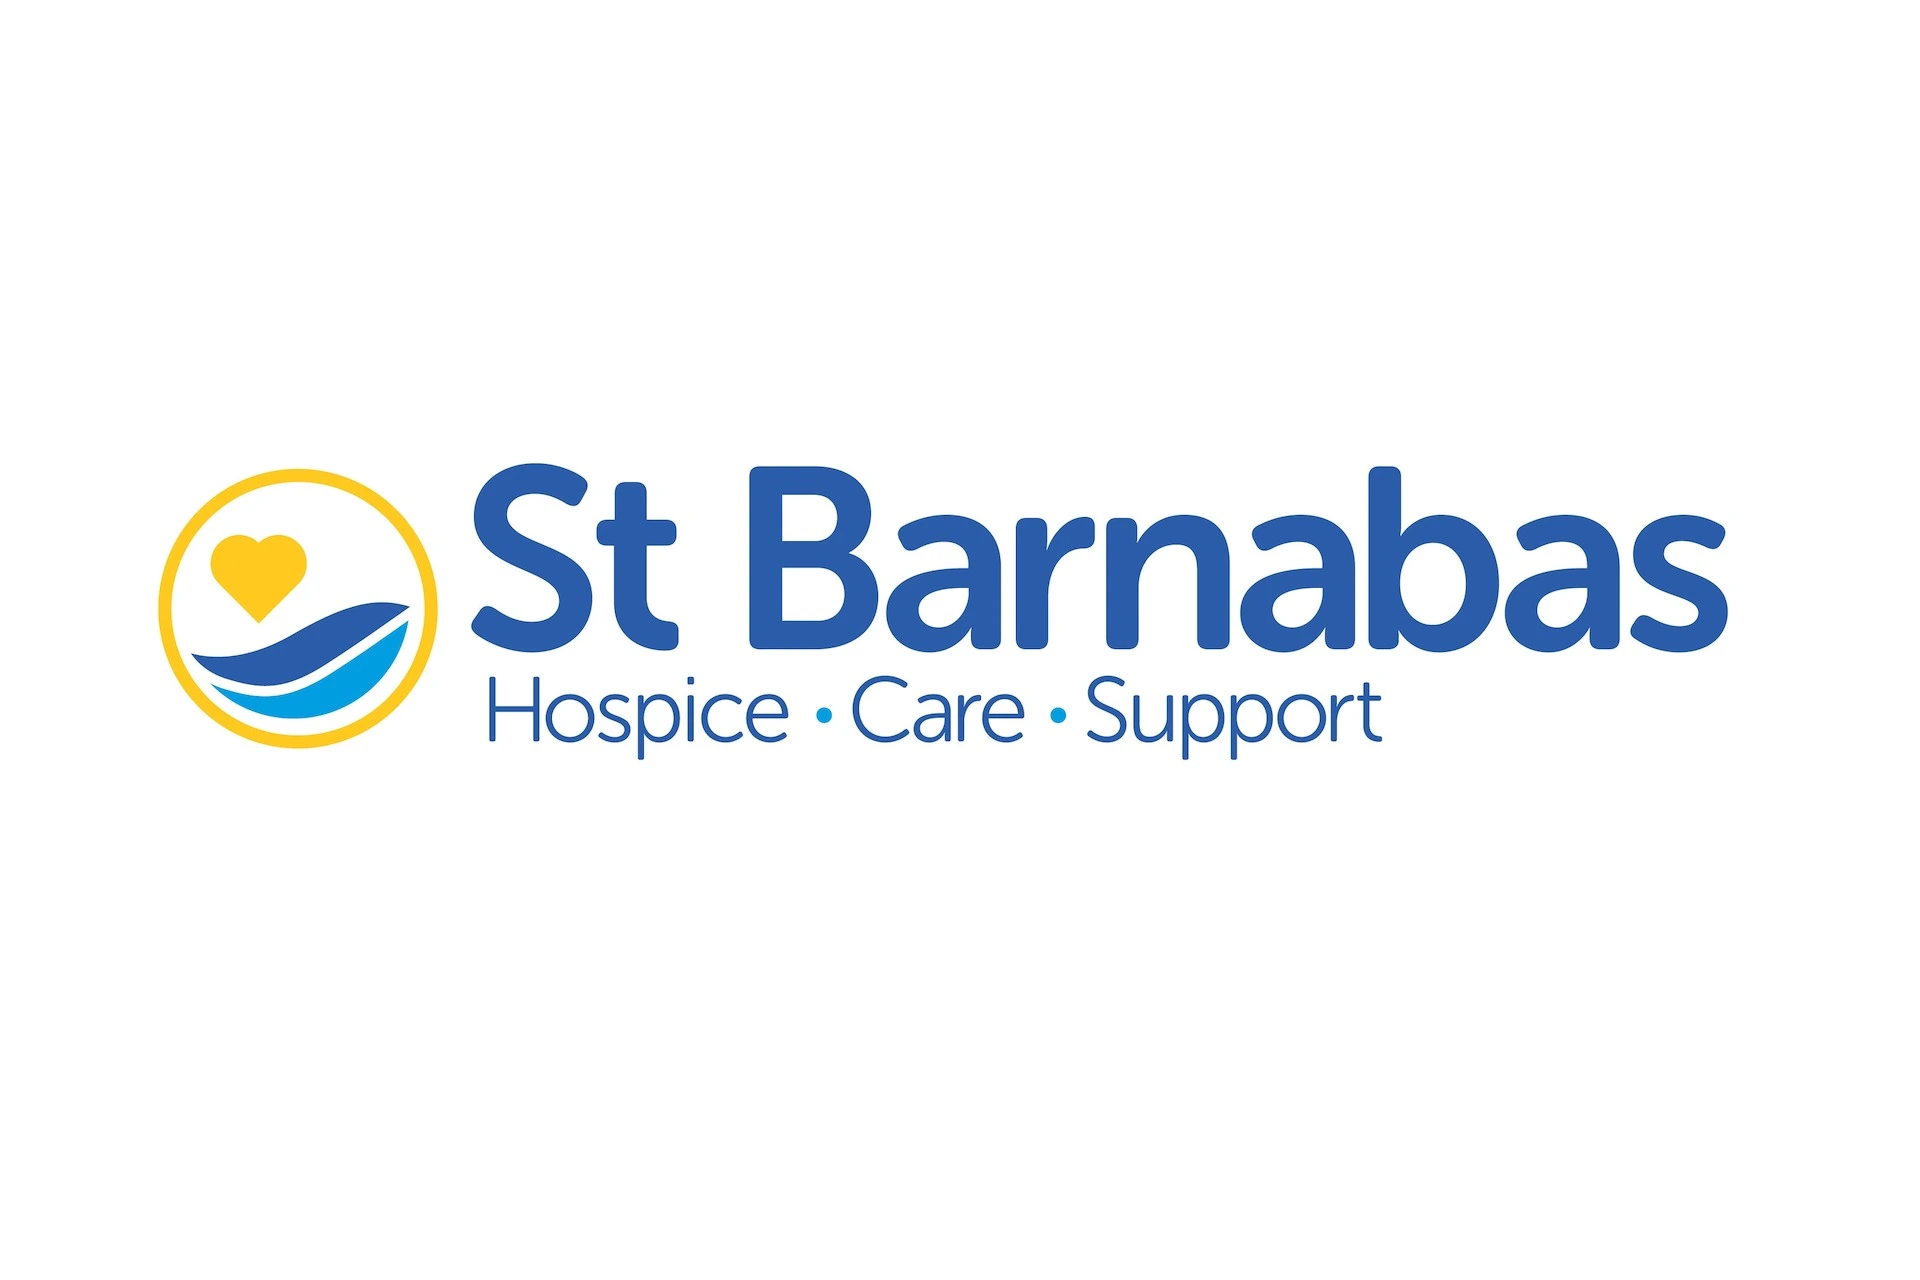 St Barnabas e-mail address accreditation and record sharing